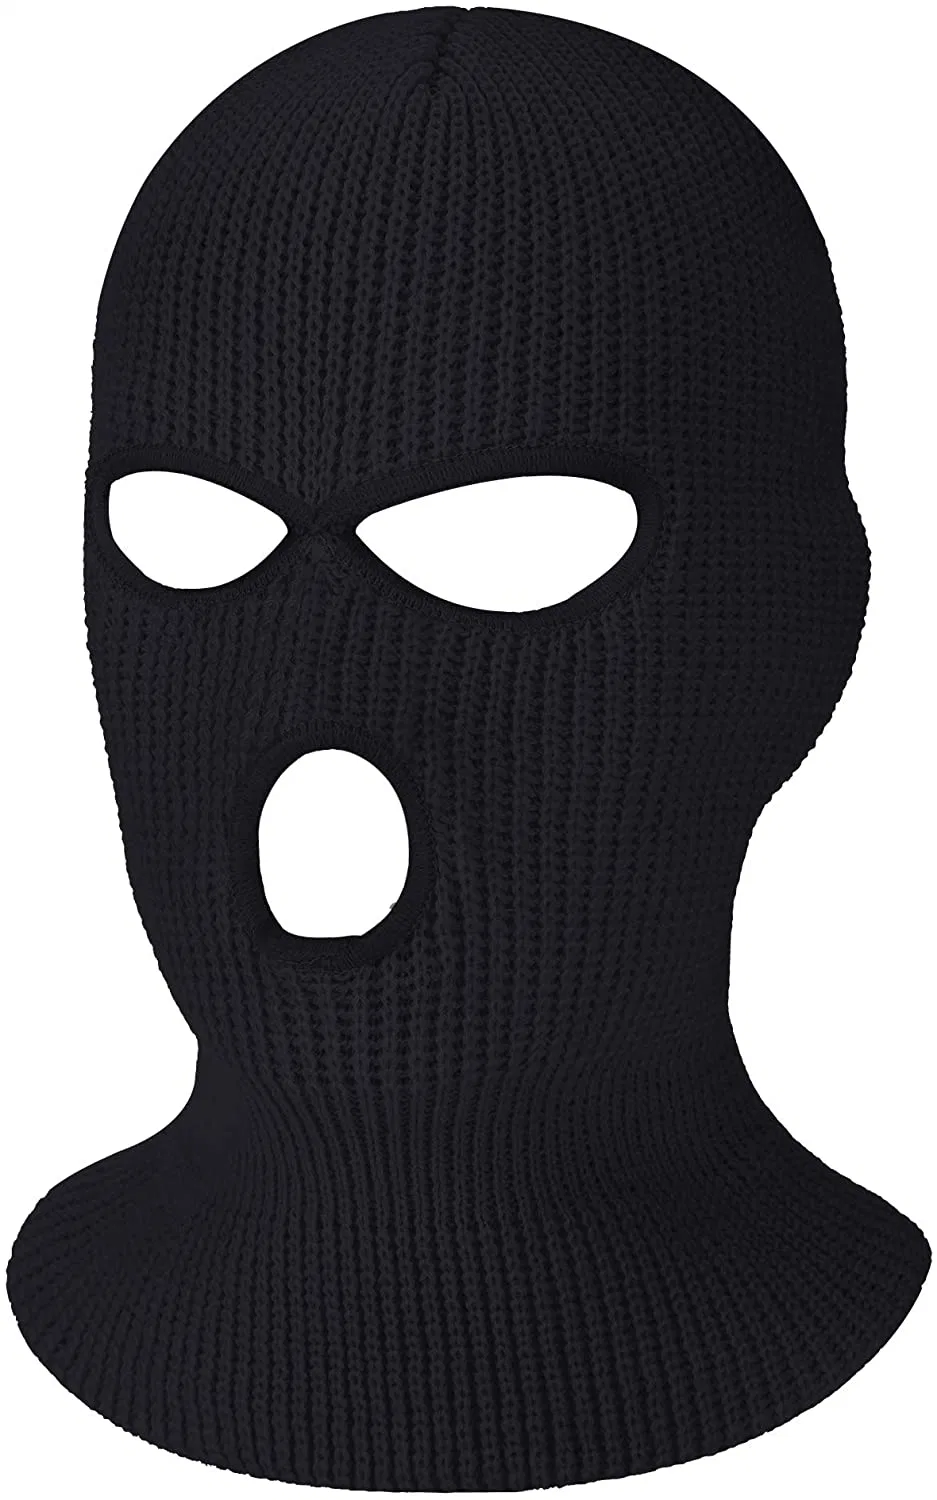 Black 3-Hole Knitted Full Face Cover Ski Mask Knitted Hat, Winter Balaclava Warm Knit Full Face Mask Knitted Hat for Outdoor Sports